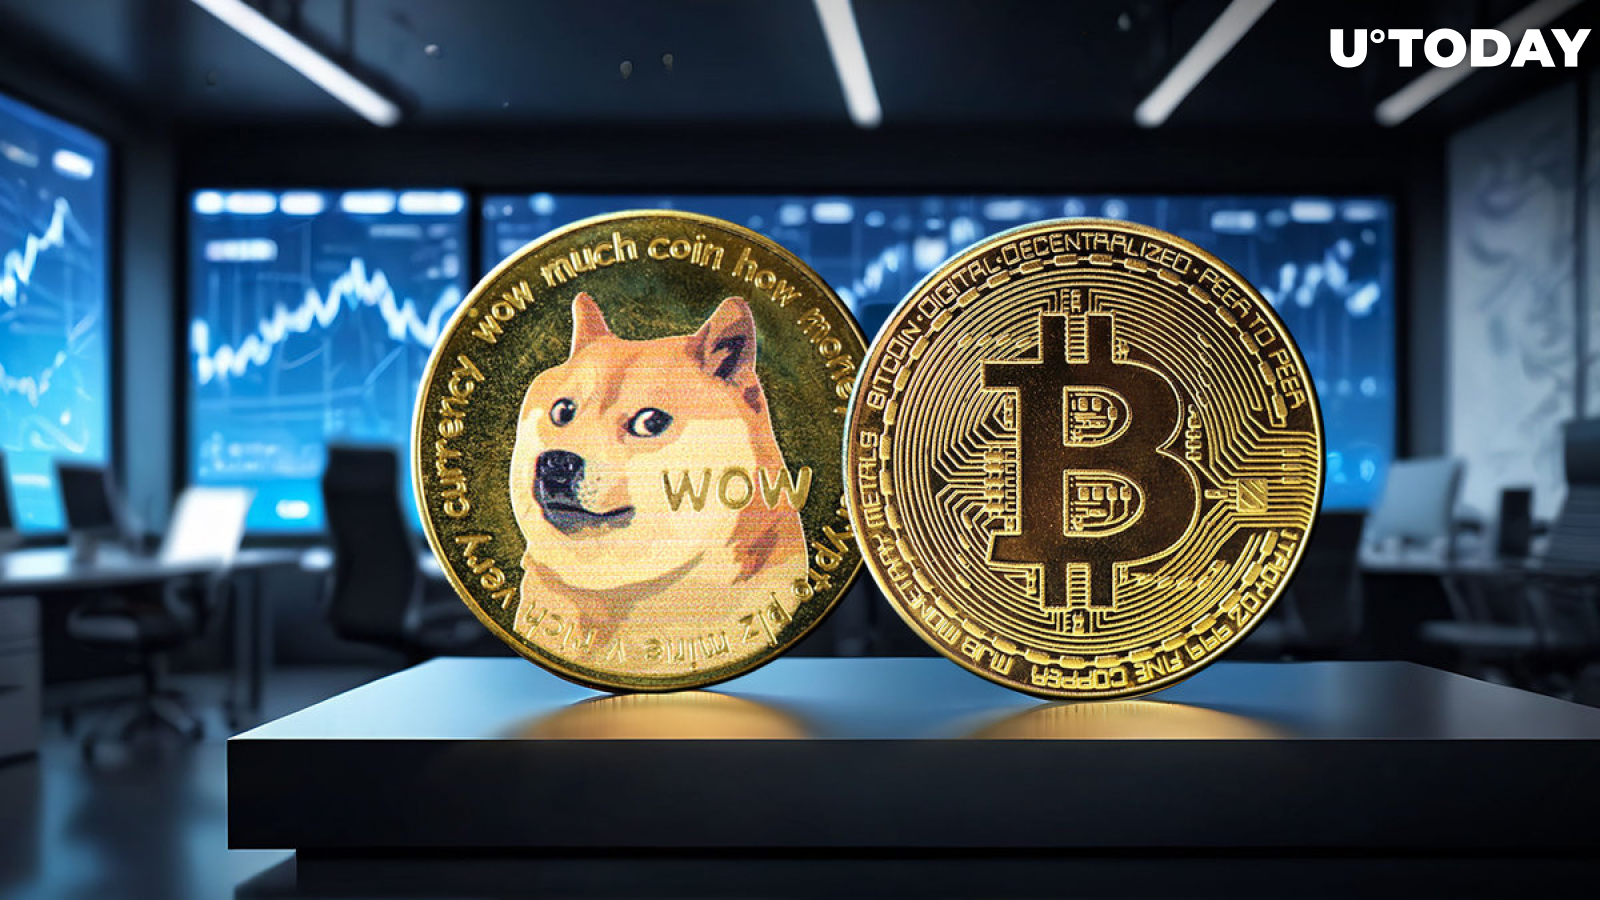 Dogecoin Founder Chooses Bitcoin Over DOGE